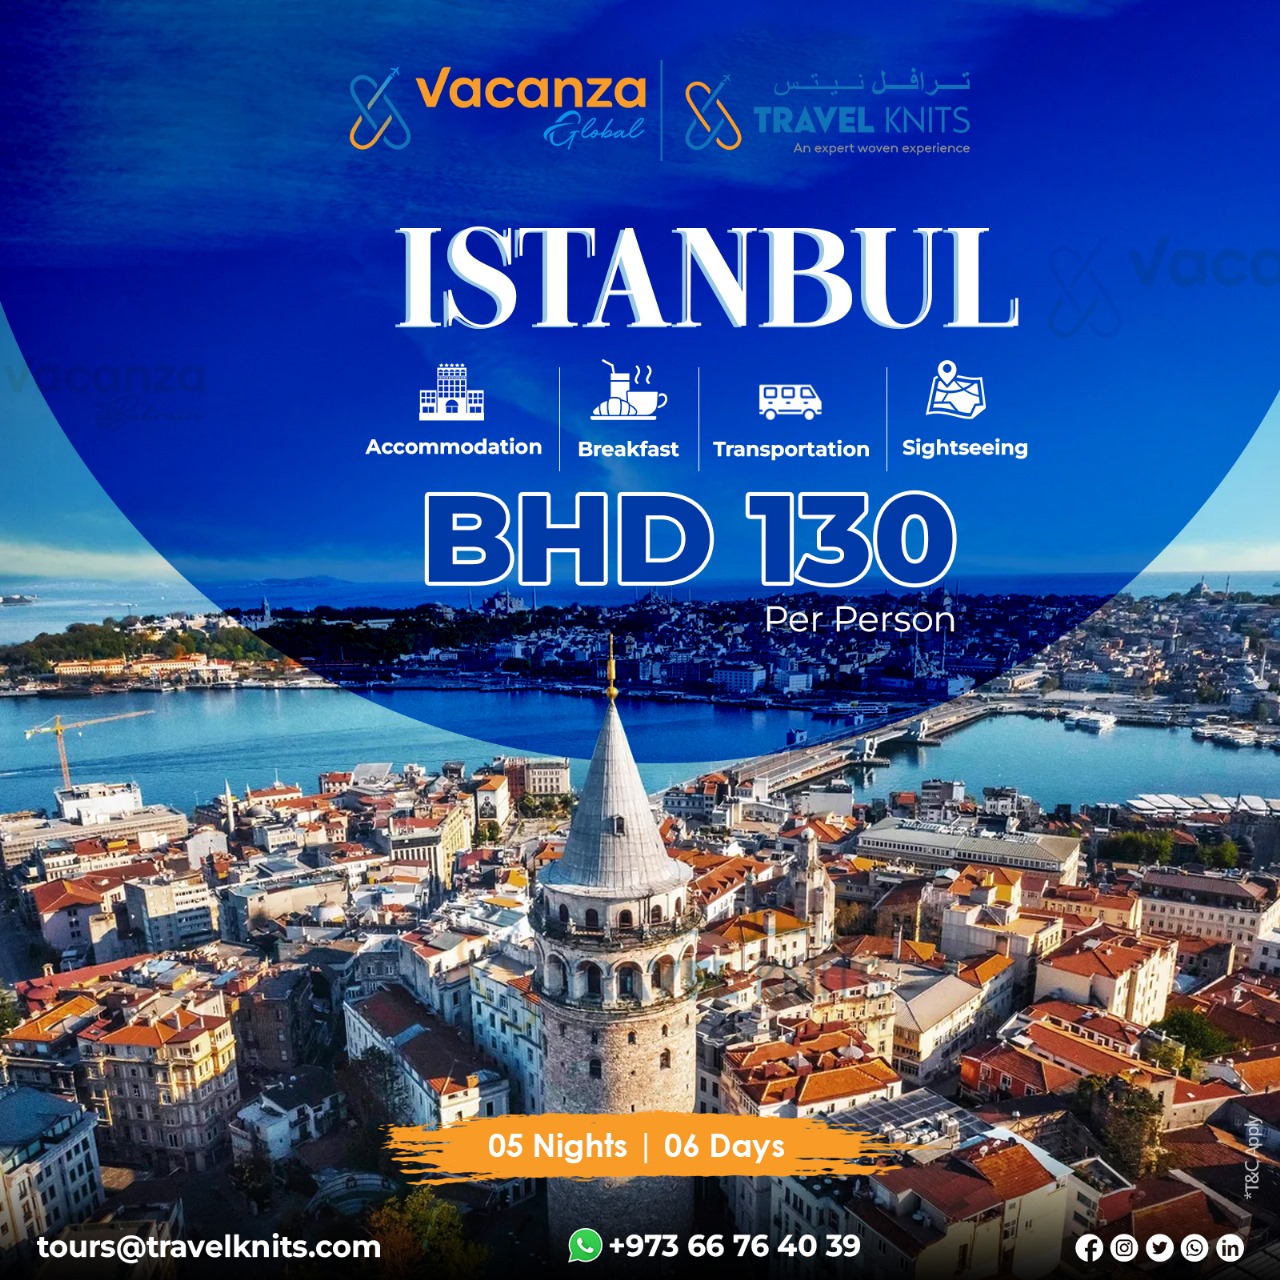 Eid holiday in turkeyTour Packages - Book honeymoon ,family,adventure tour packages to Eid holiday in turkey|Travel Knits